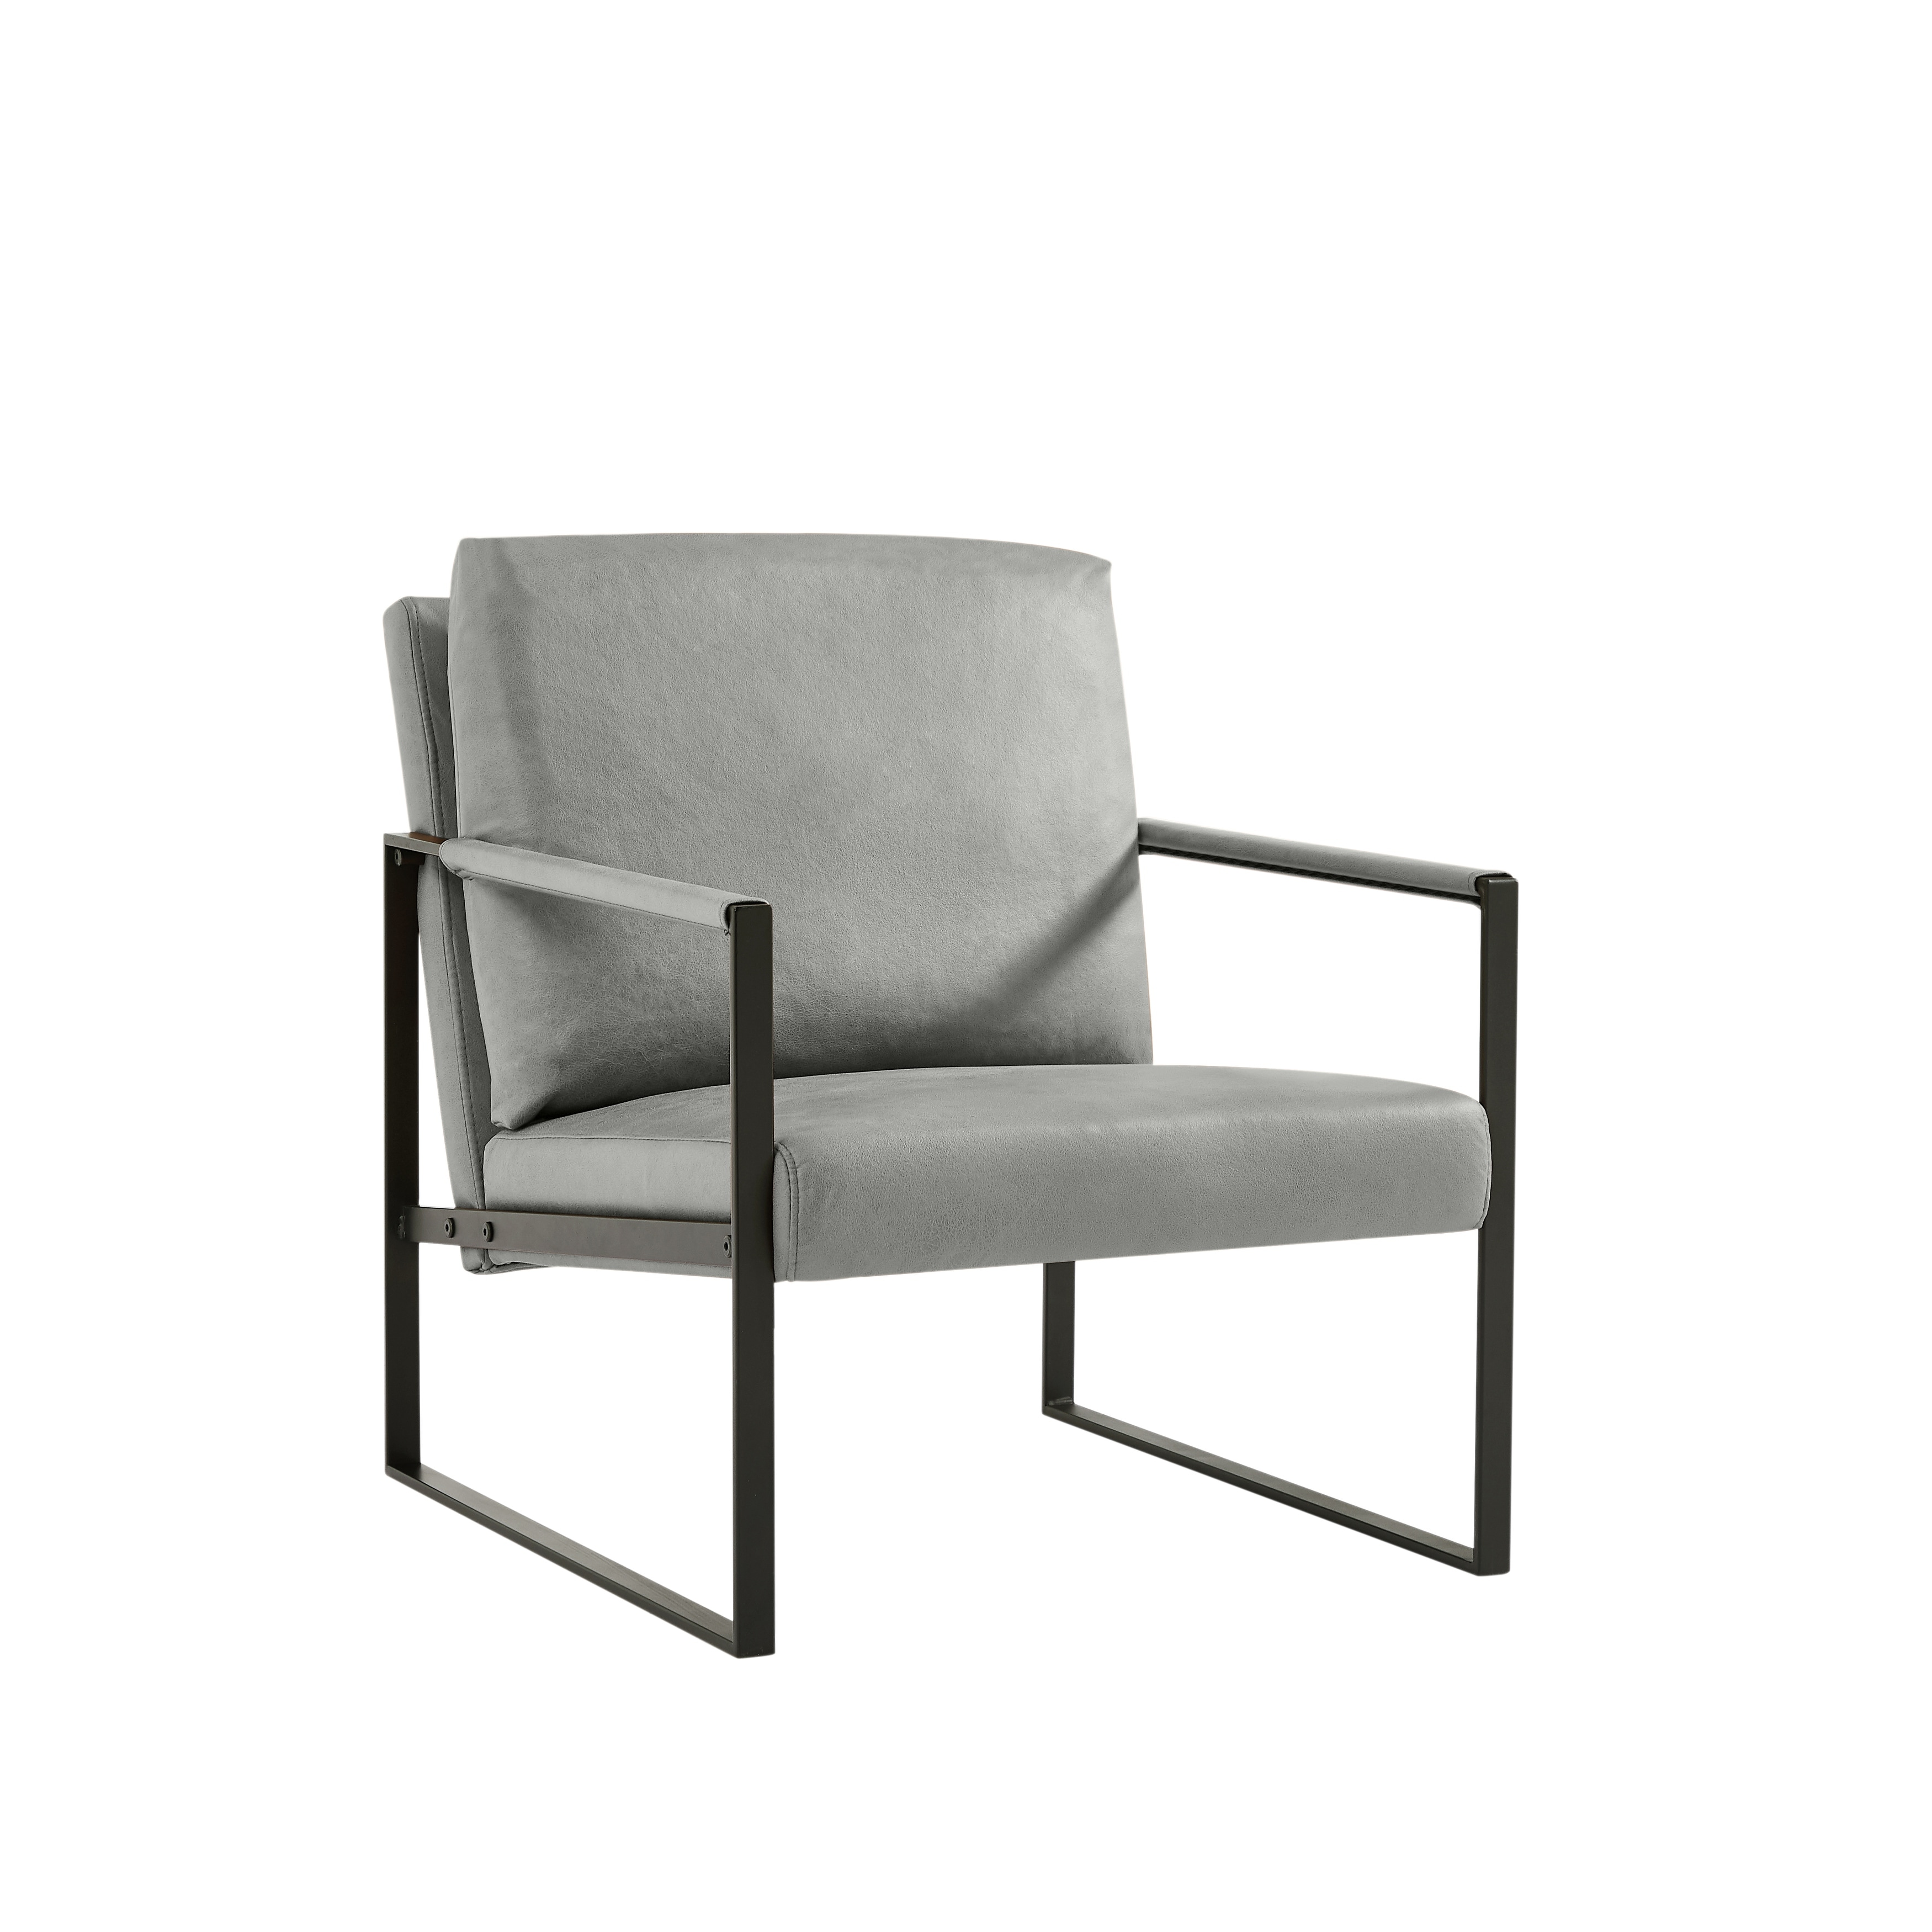 https://ak1.ostkcdn.com/images/products/is/images/direct/31c0a7fcbdc09e15162035329337dcd94c6a7e27/Modern-PU-Leather-Accent-Arm-Chair-with-Extra-Thick-Padded-Backrest-and-Seat-Cushion-Sofa-Chair.jpg